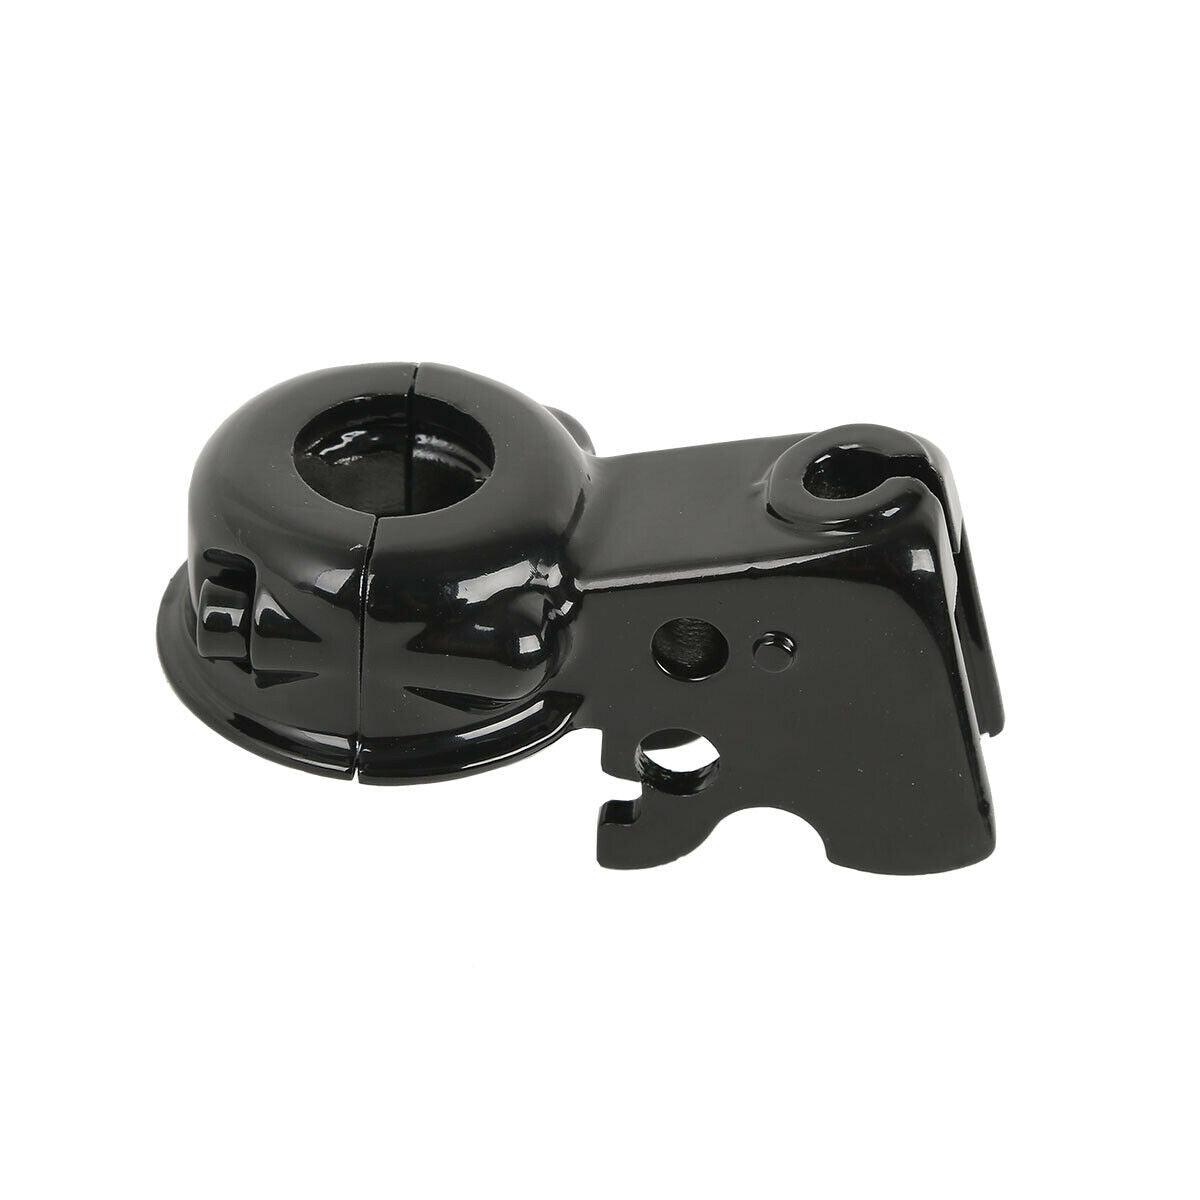 Clutch Lever Mount Bracket Perch Fit For Harley RoadGlide Softail Dyna Sportster - Moto Life Products